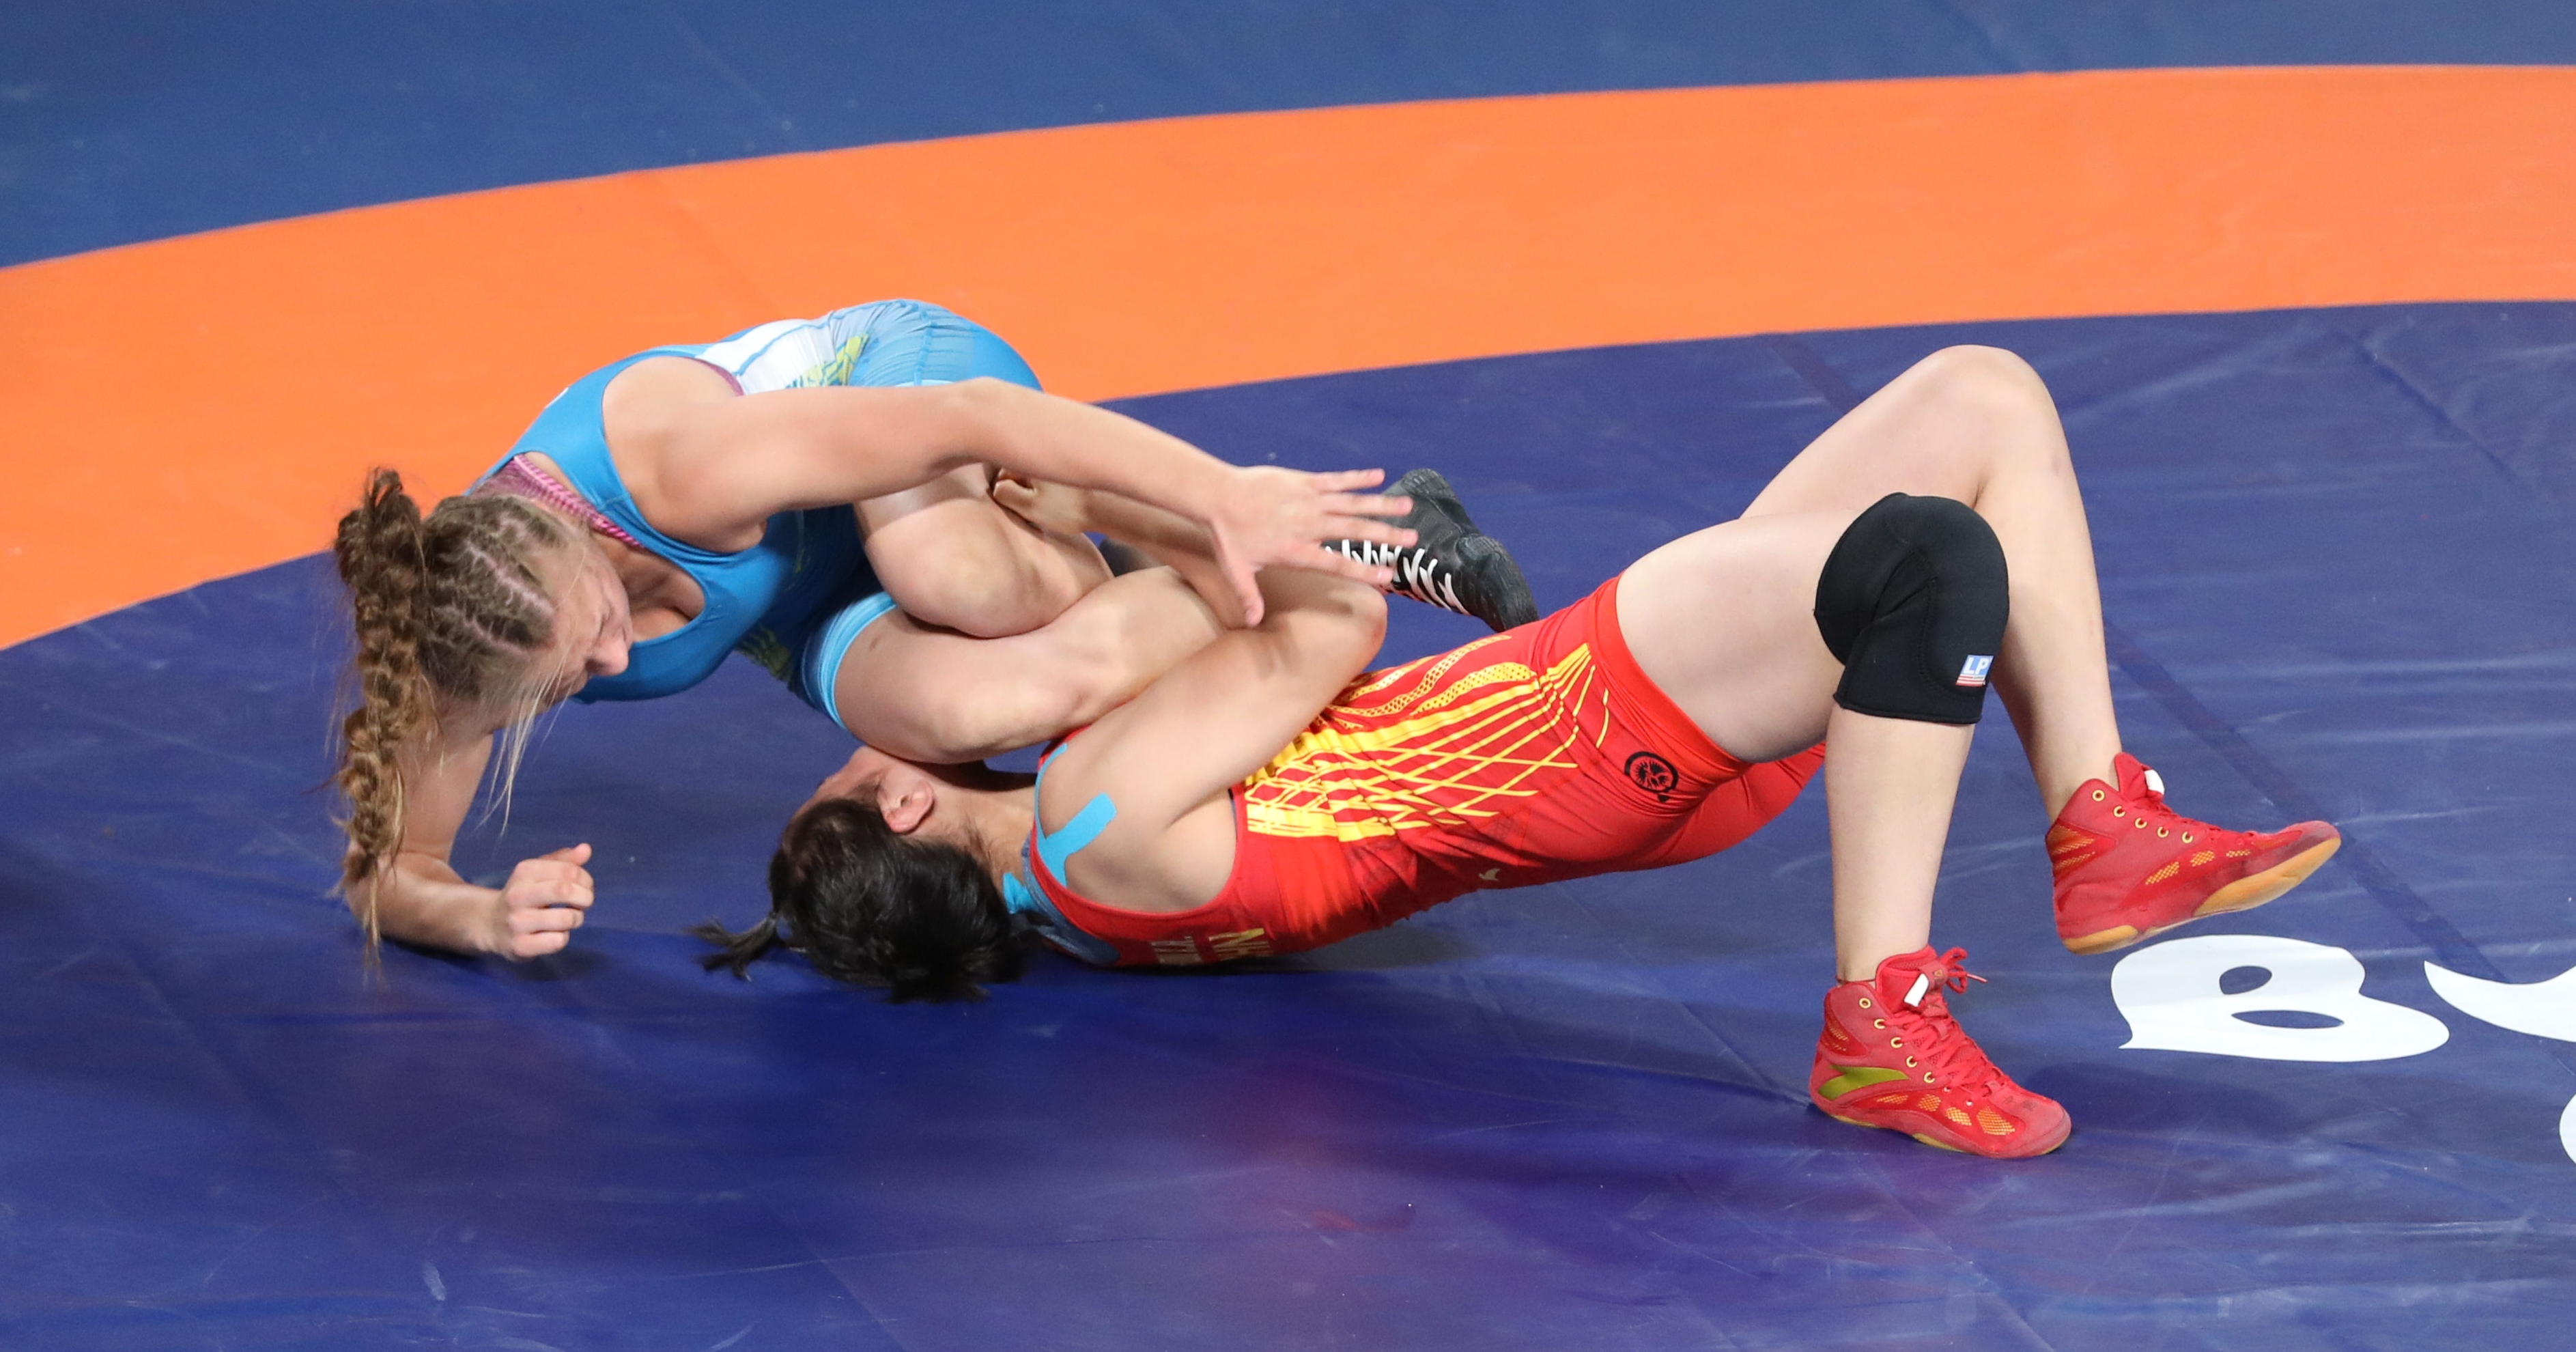 Freestyle wrestling: Rules, scoring, and all you need to know